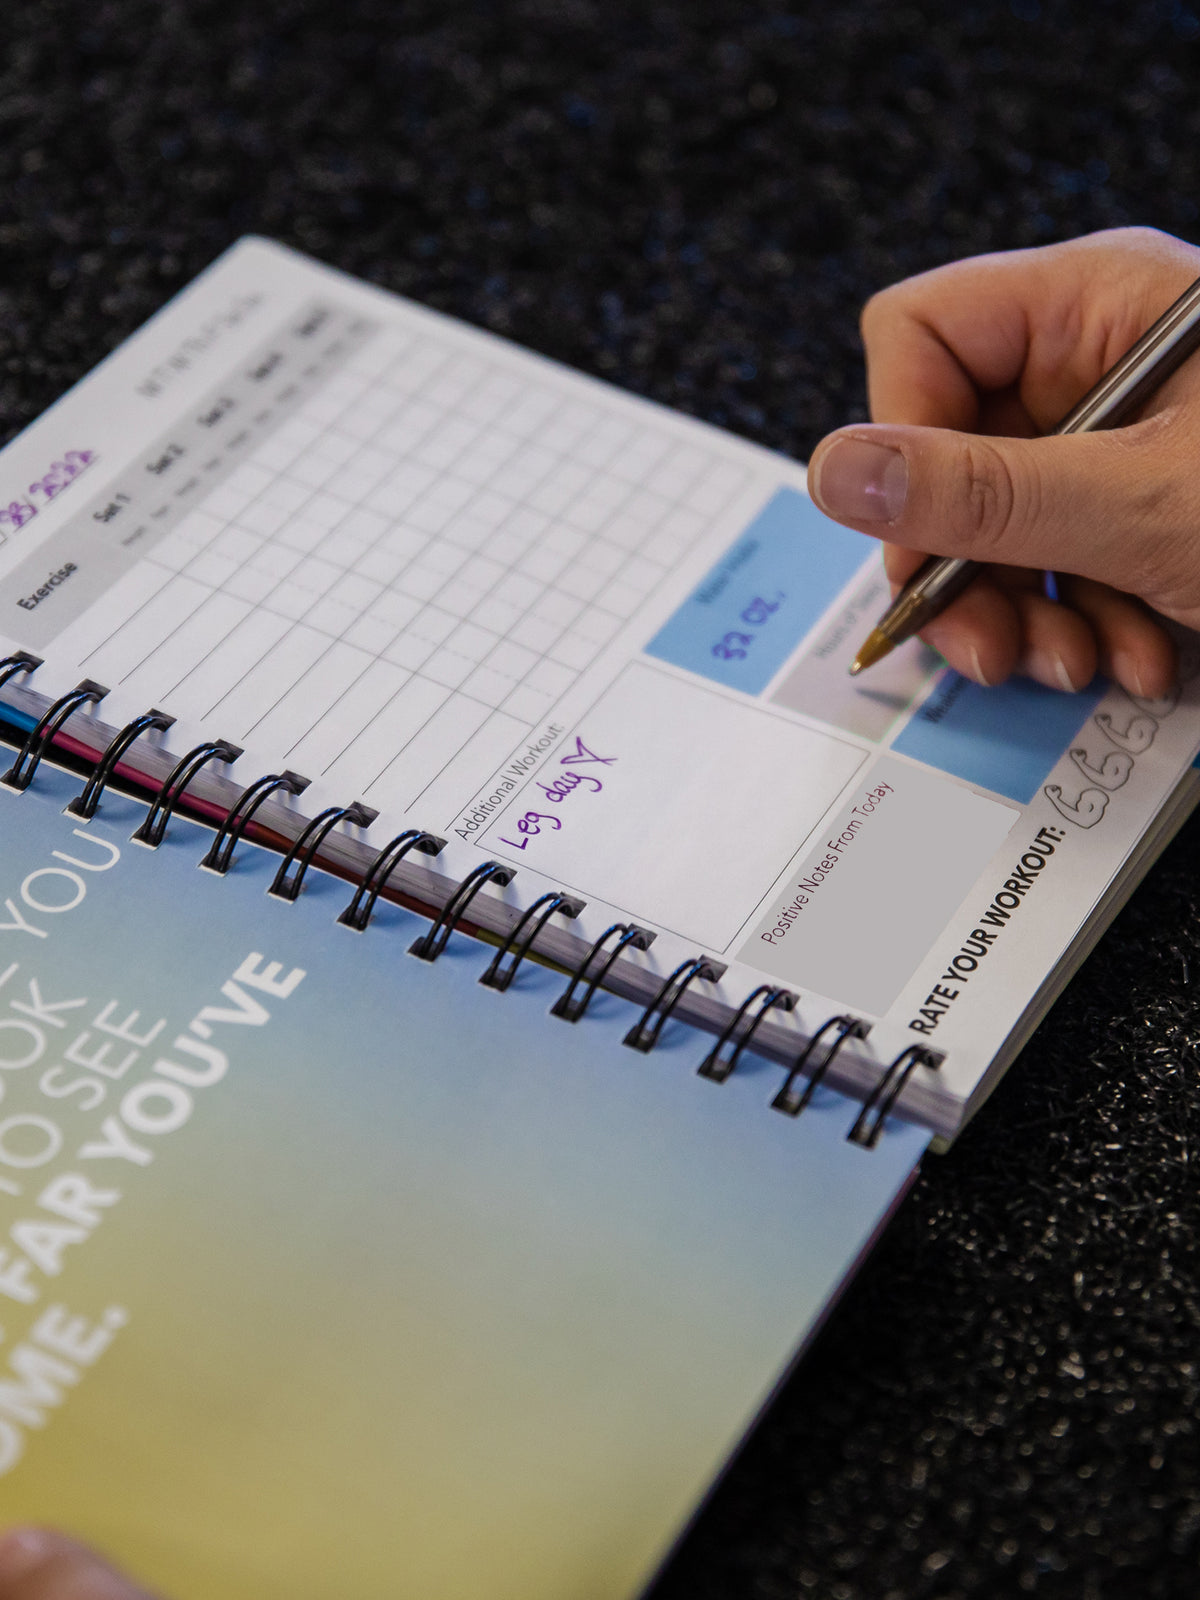 Writing with a pen inside a fitness journal